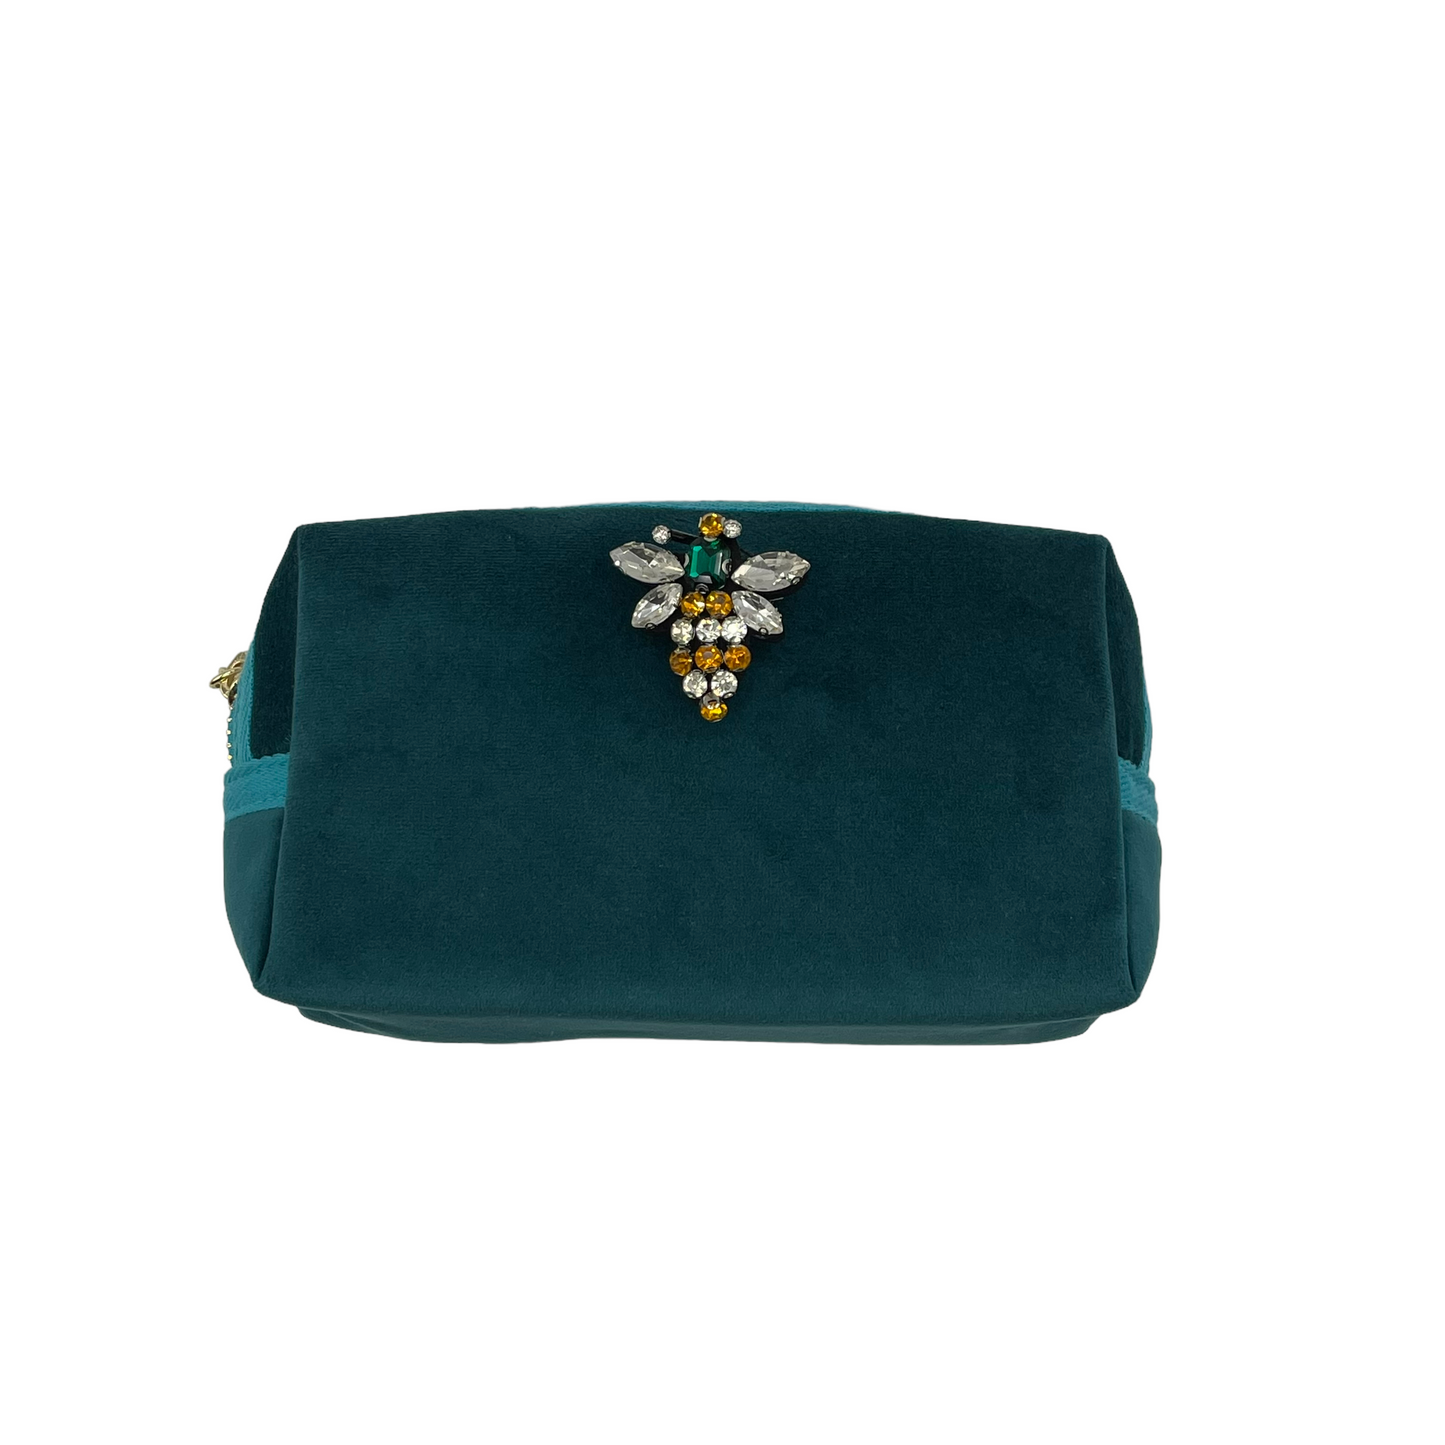 Teal make-up bag & queen bee pin - recycled velvet